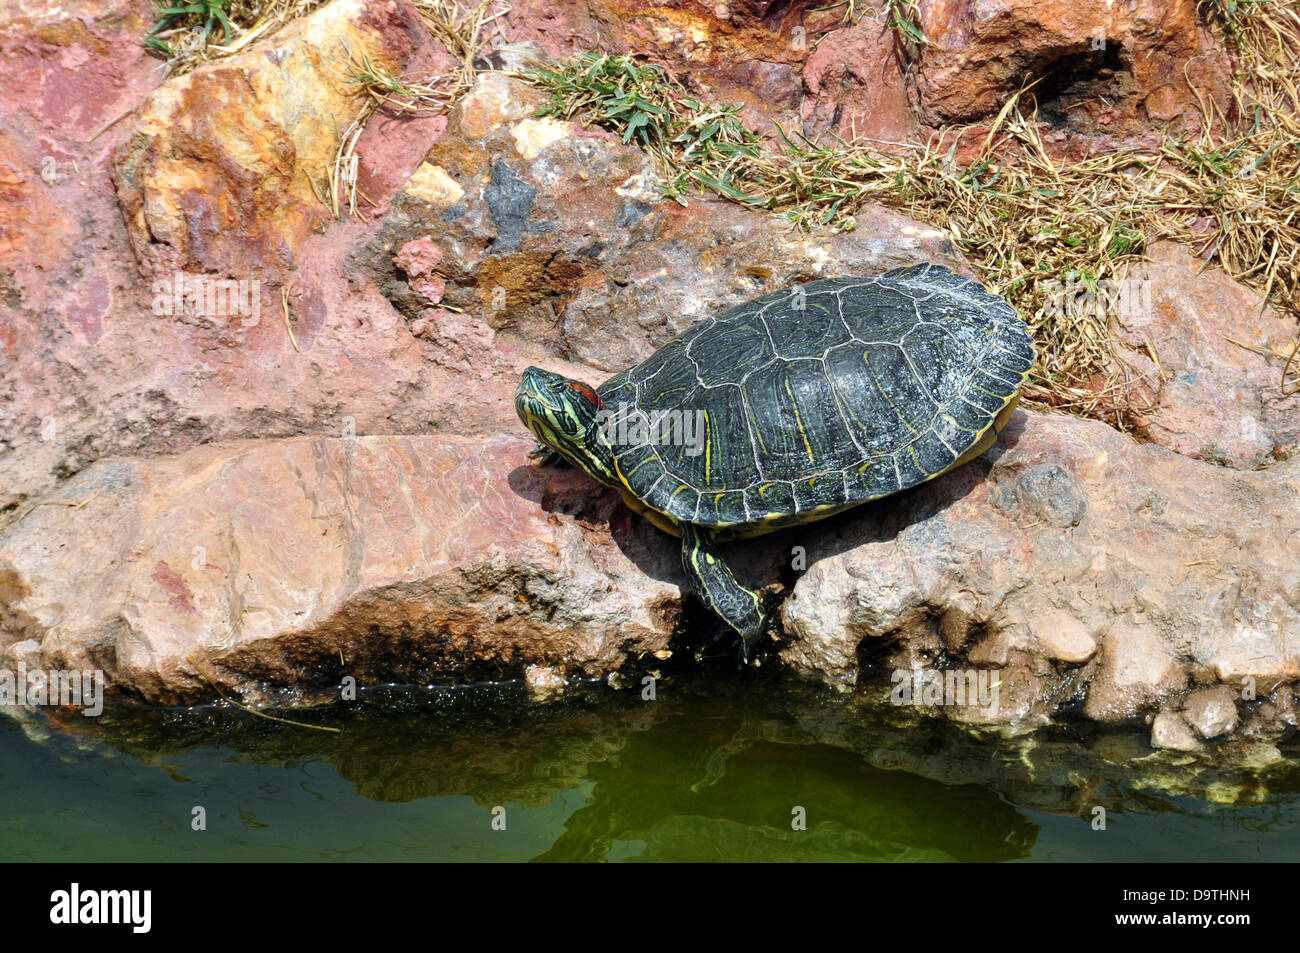 Red-eared slider turtle by the edge of the water. Stock Photo